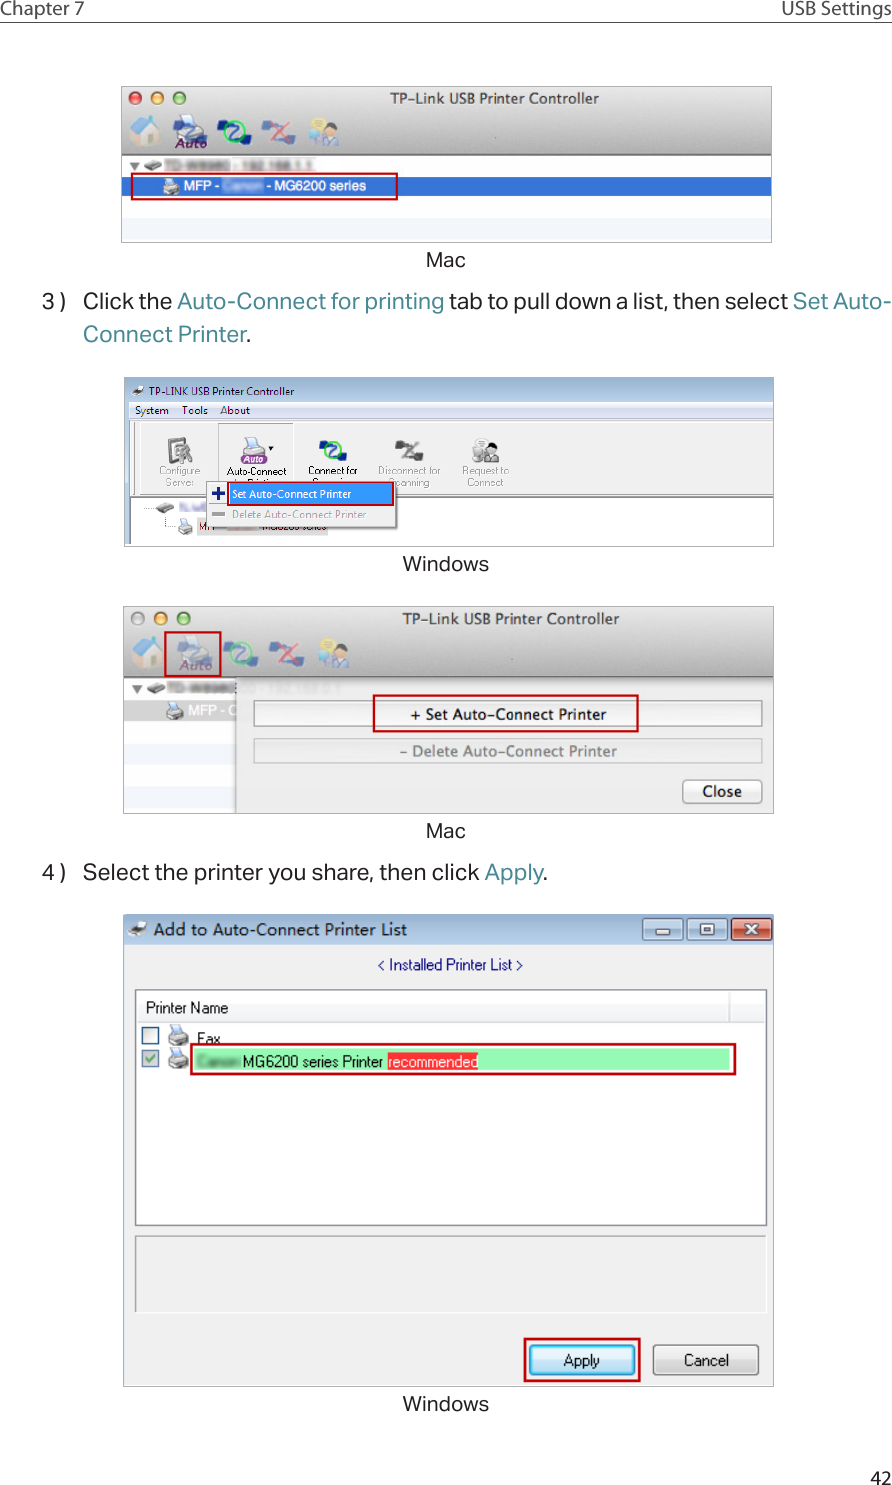 42Chapter 7 USB SettingsMac3 )  Click the Auto-Connect for printing tab to pull down a list, then select Set Auto-Connect Printer. Windows Mac4 )  Select the printer you share, then click Apply. Windows